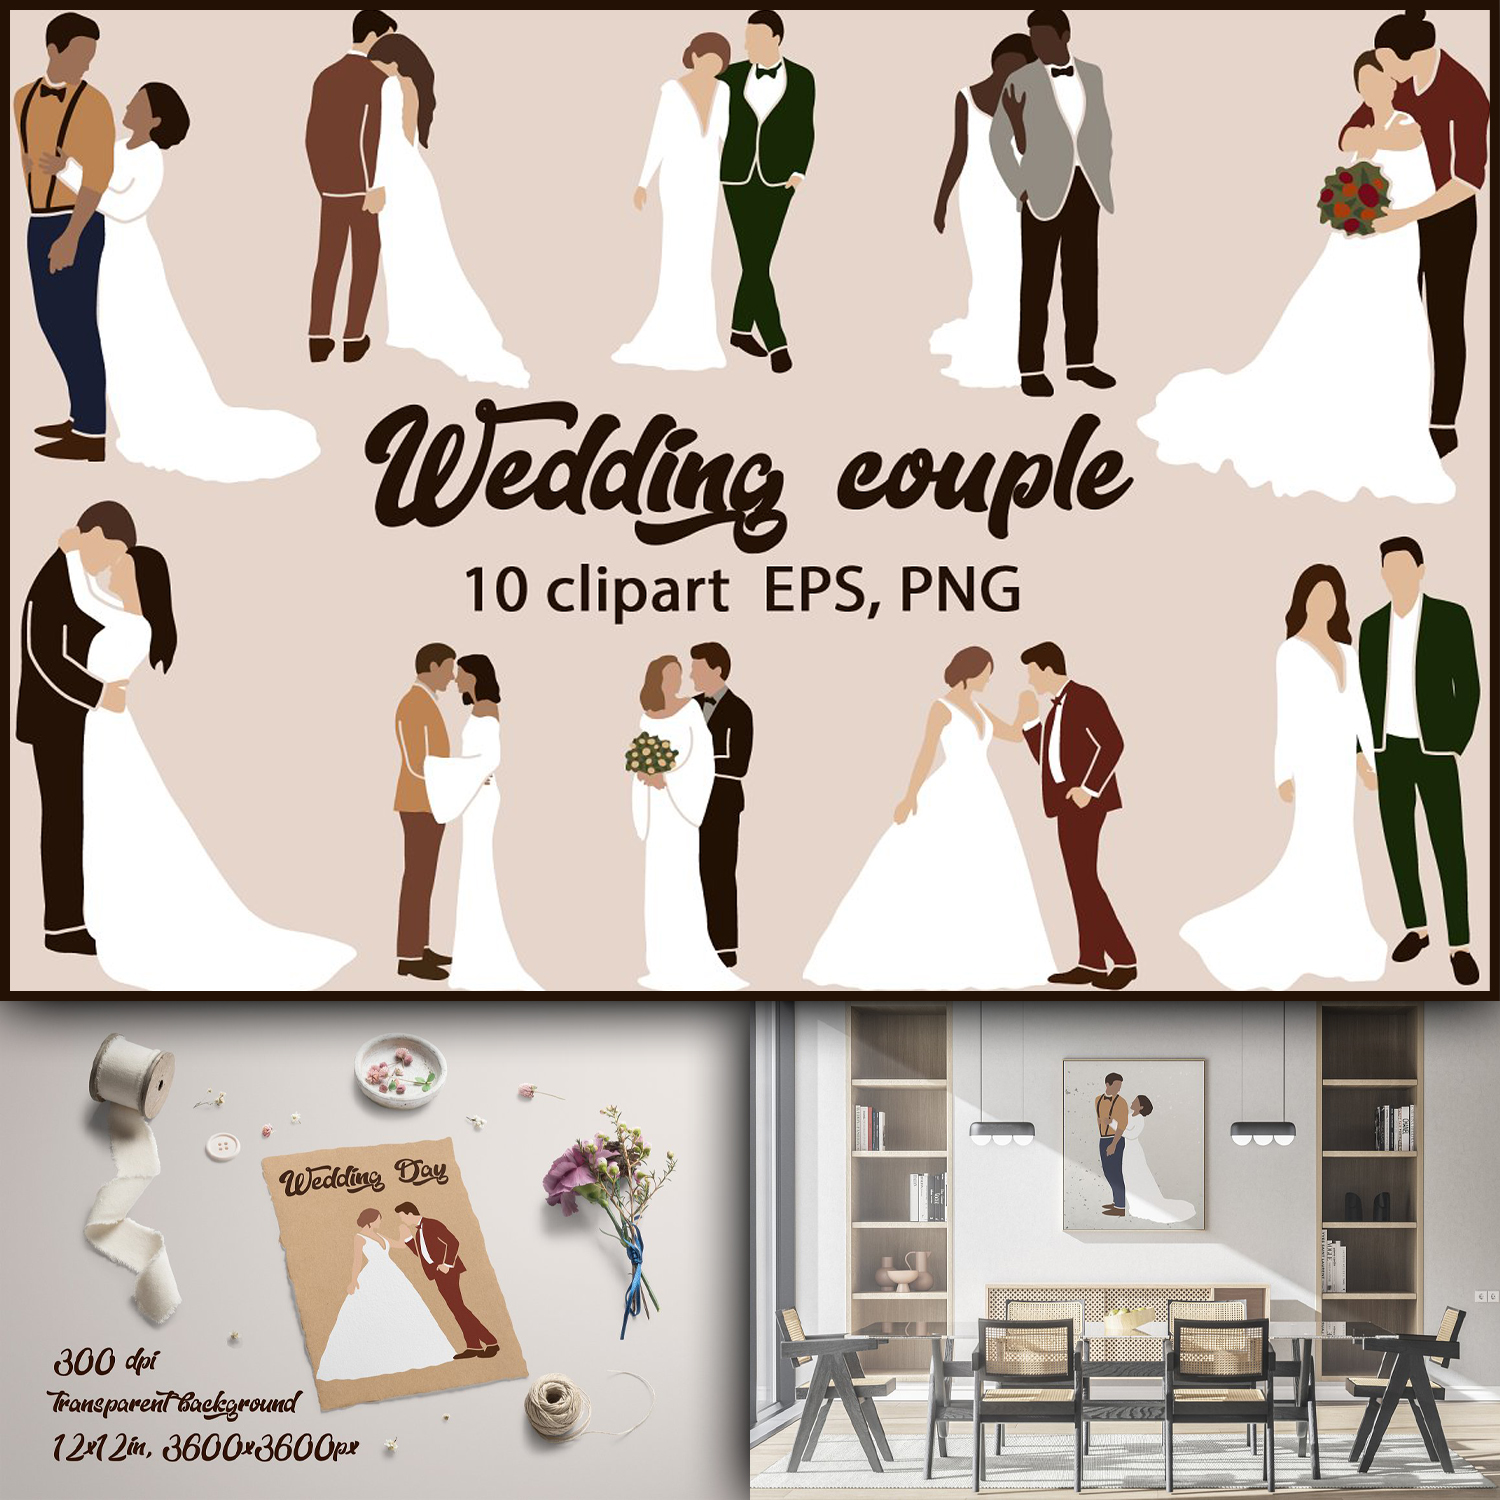 Preview wedding couple bride groom clipart.